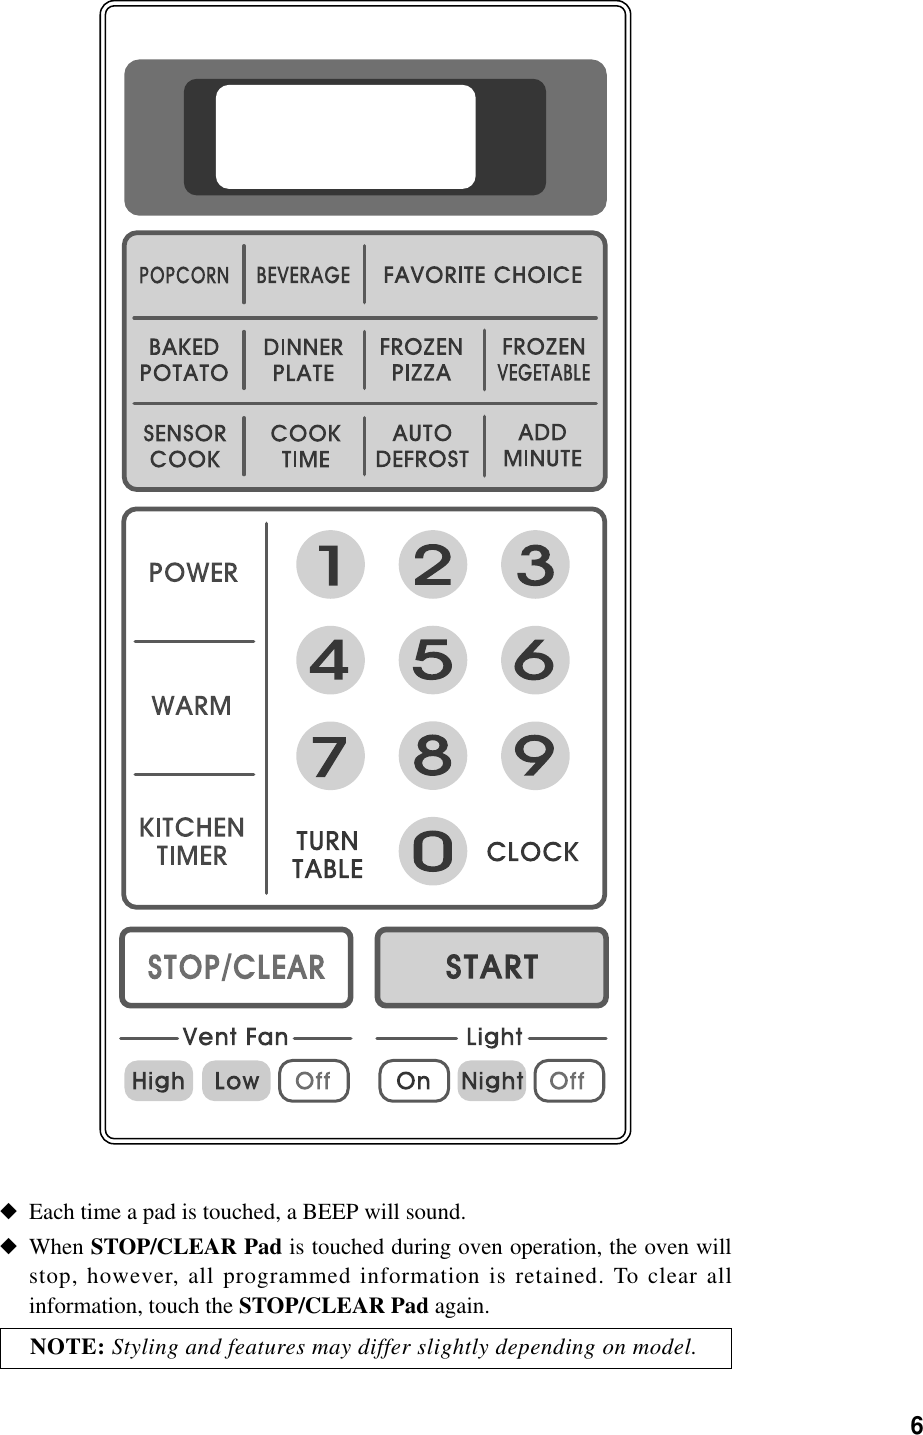 6◆Each time a pad is touched, a BEEP will sound.◆When STOP/CLEAR Pad is touched during oven operation, the oven willstop, however, all programmed information is retained. To clear allinformation, touch the STOP/CLEAR Pad again.NOTE: Styling and features may differ slightly depending on model.